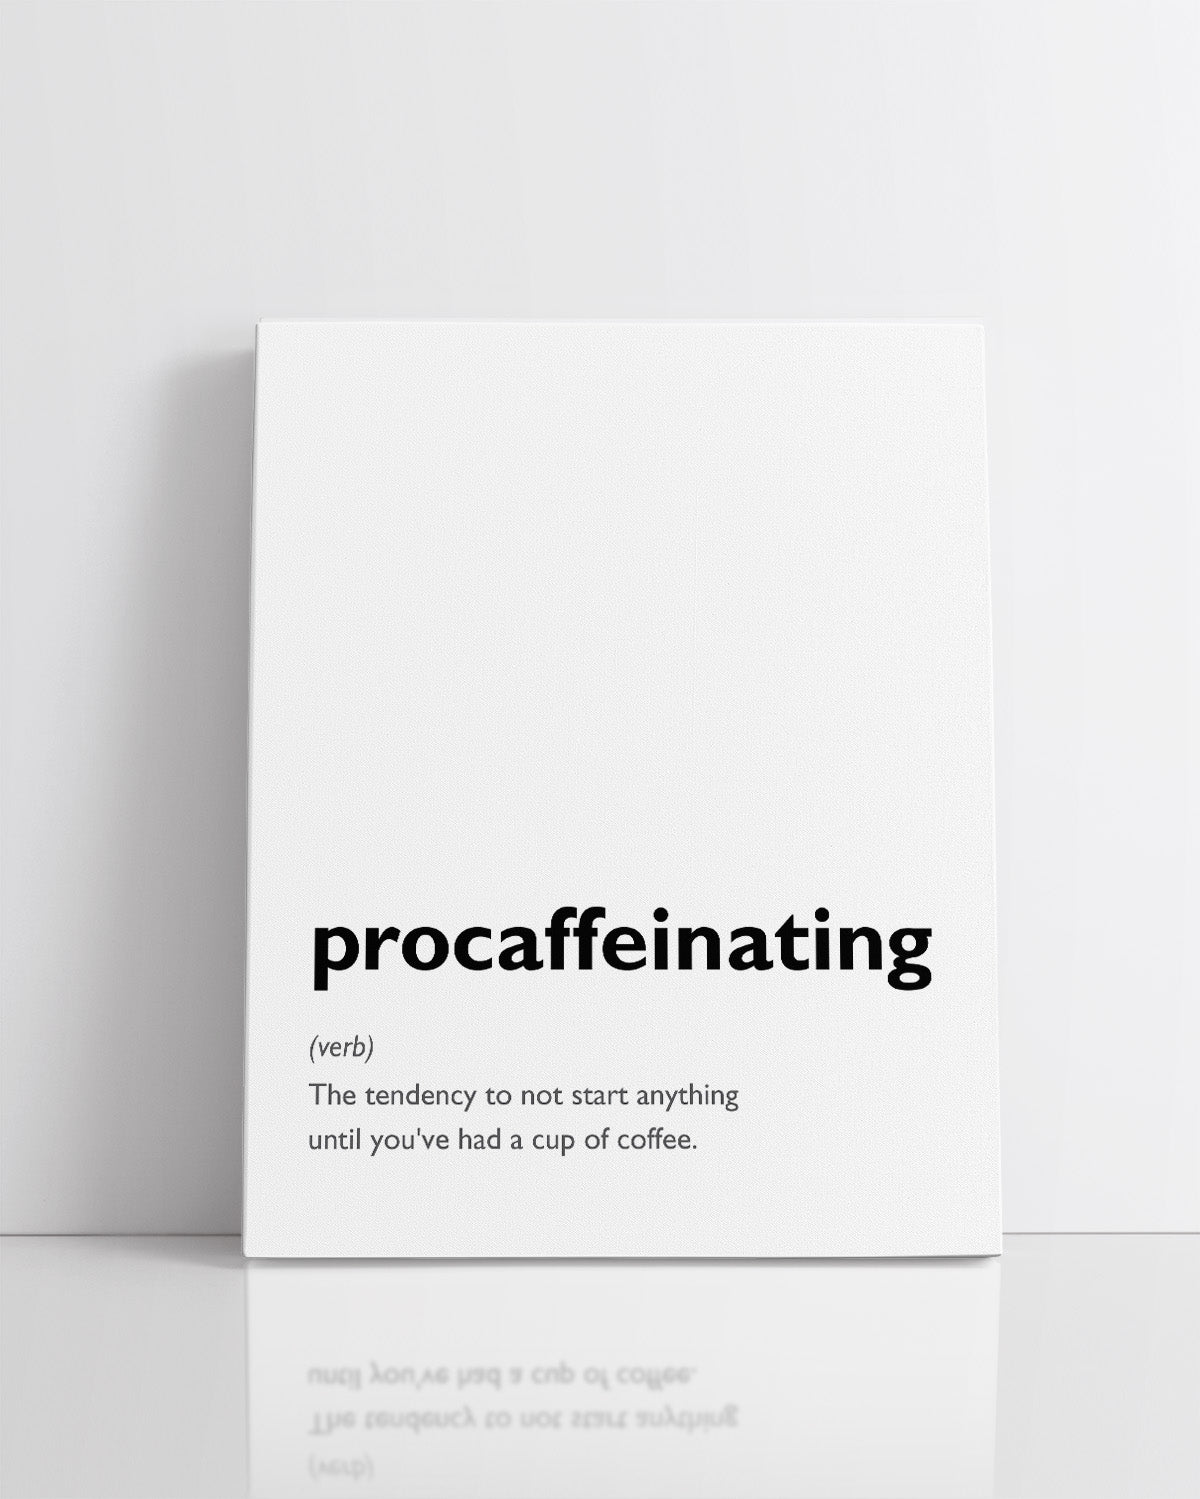 Procaffeinating Definition Wall Art - Funny Gift for Coffee Lovers - Minimalist Modern Typography Wall Decor - Kitchen Wall Decor - Gift for Coffee Drinkers